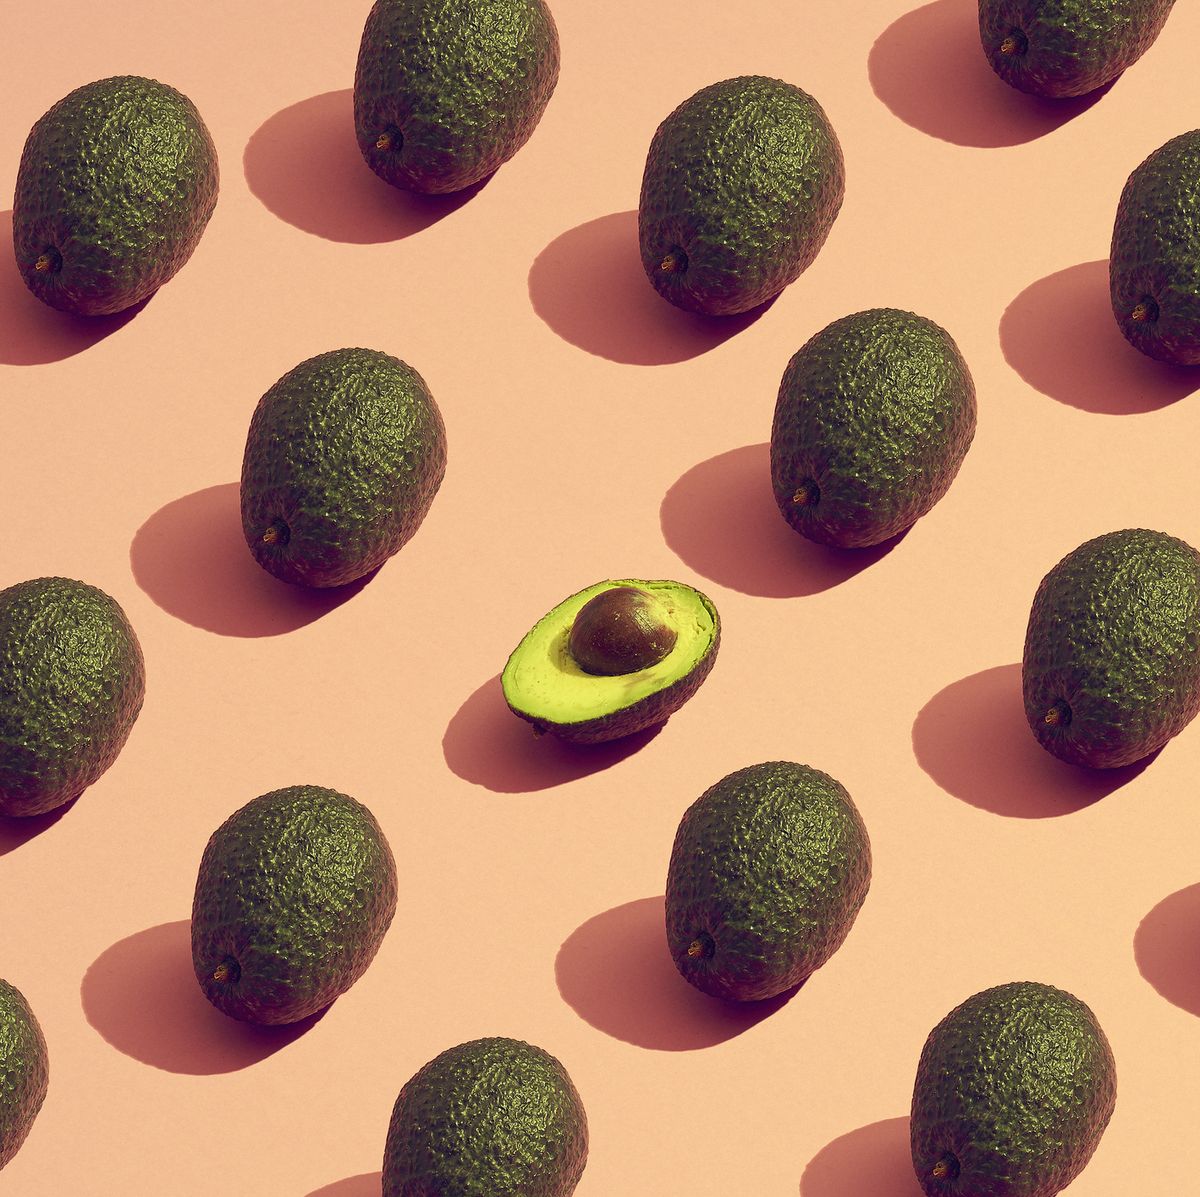 https://hips.hearstapps.com/hmg-prod/images/how-to-ripen-avocado-quickly-642af818bd522.jpg?crop=0.669xw:1.00xh;0.166xw,0&resize=1200:*